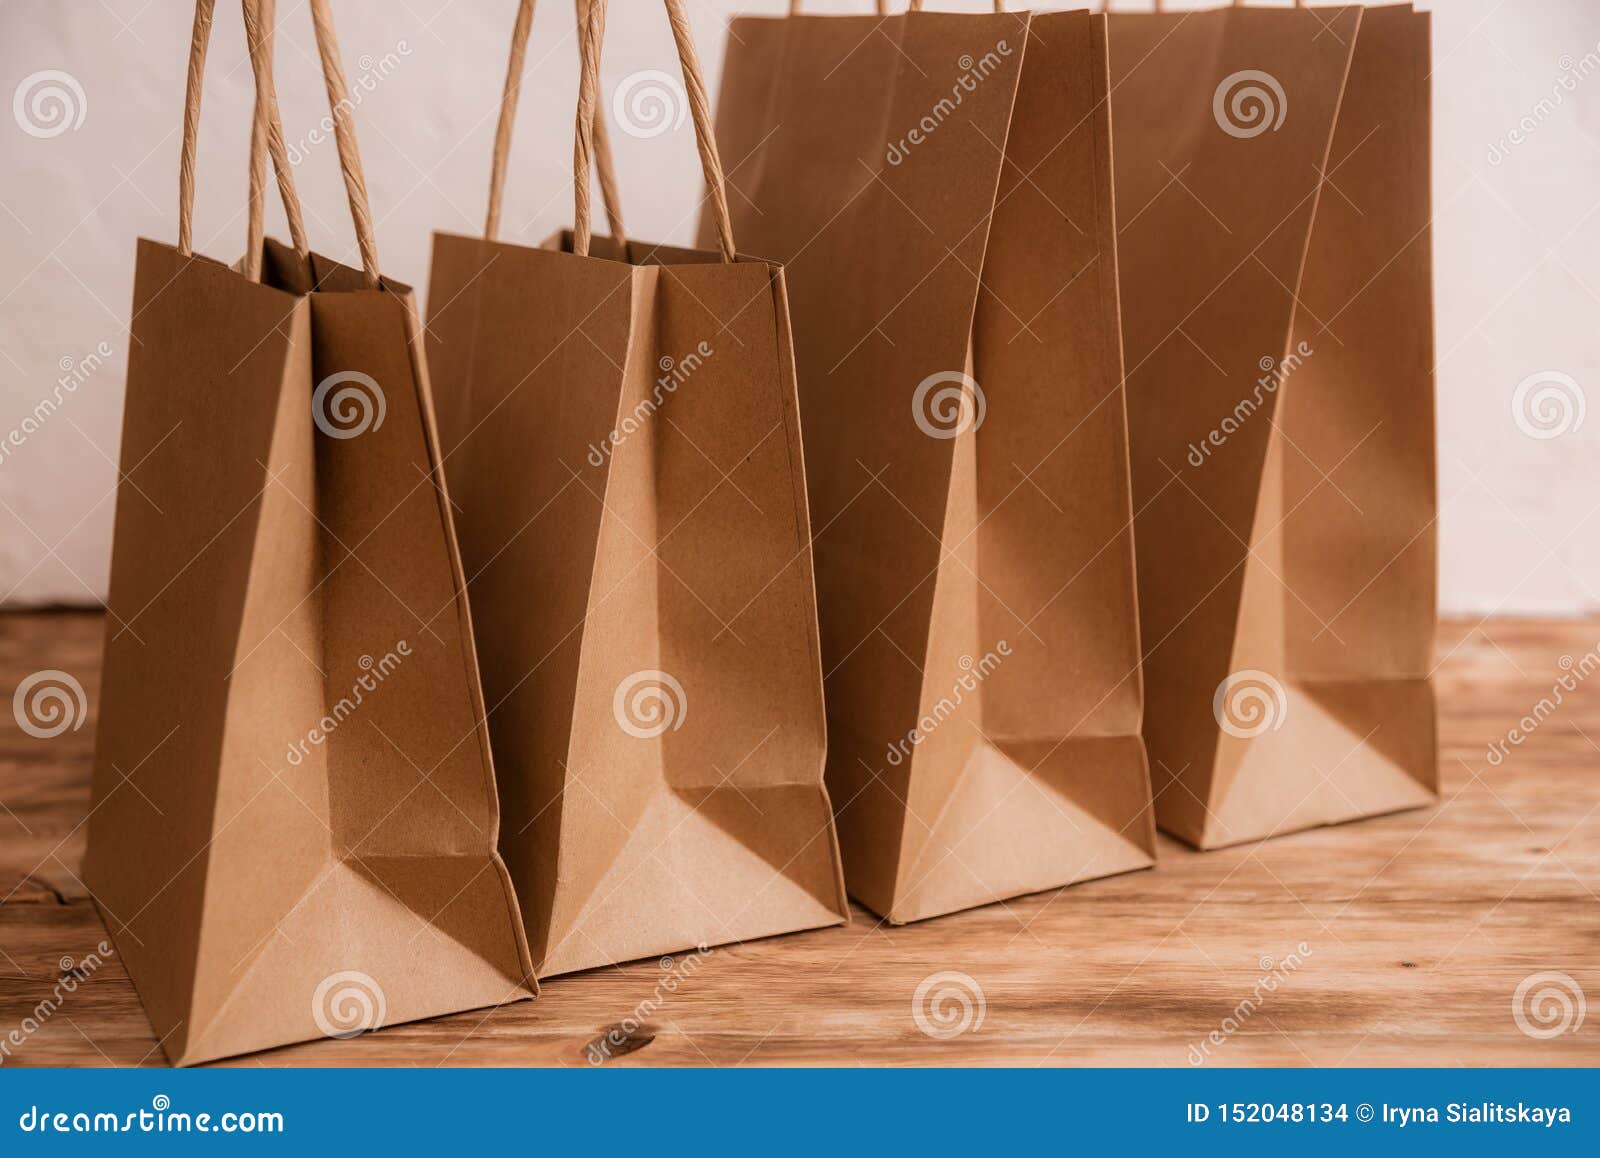 Download Mock-up Of Brown Craft Paper Package With Handles, Empty Shopping Bag With Area For Your Logo Or ...